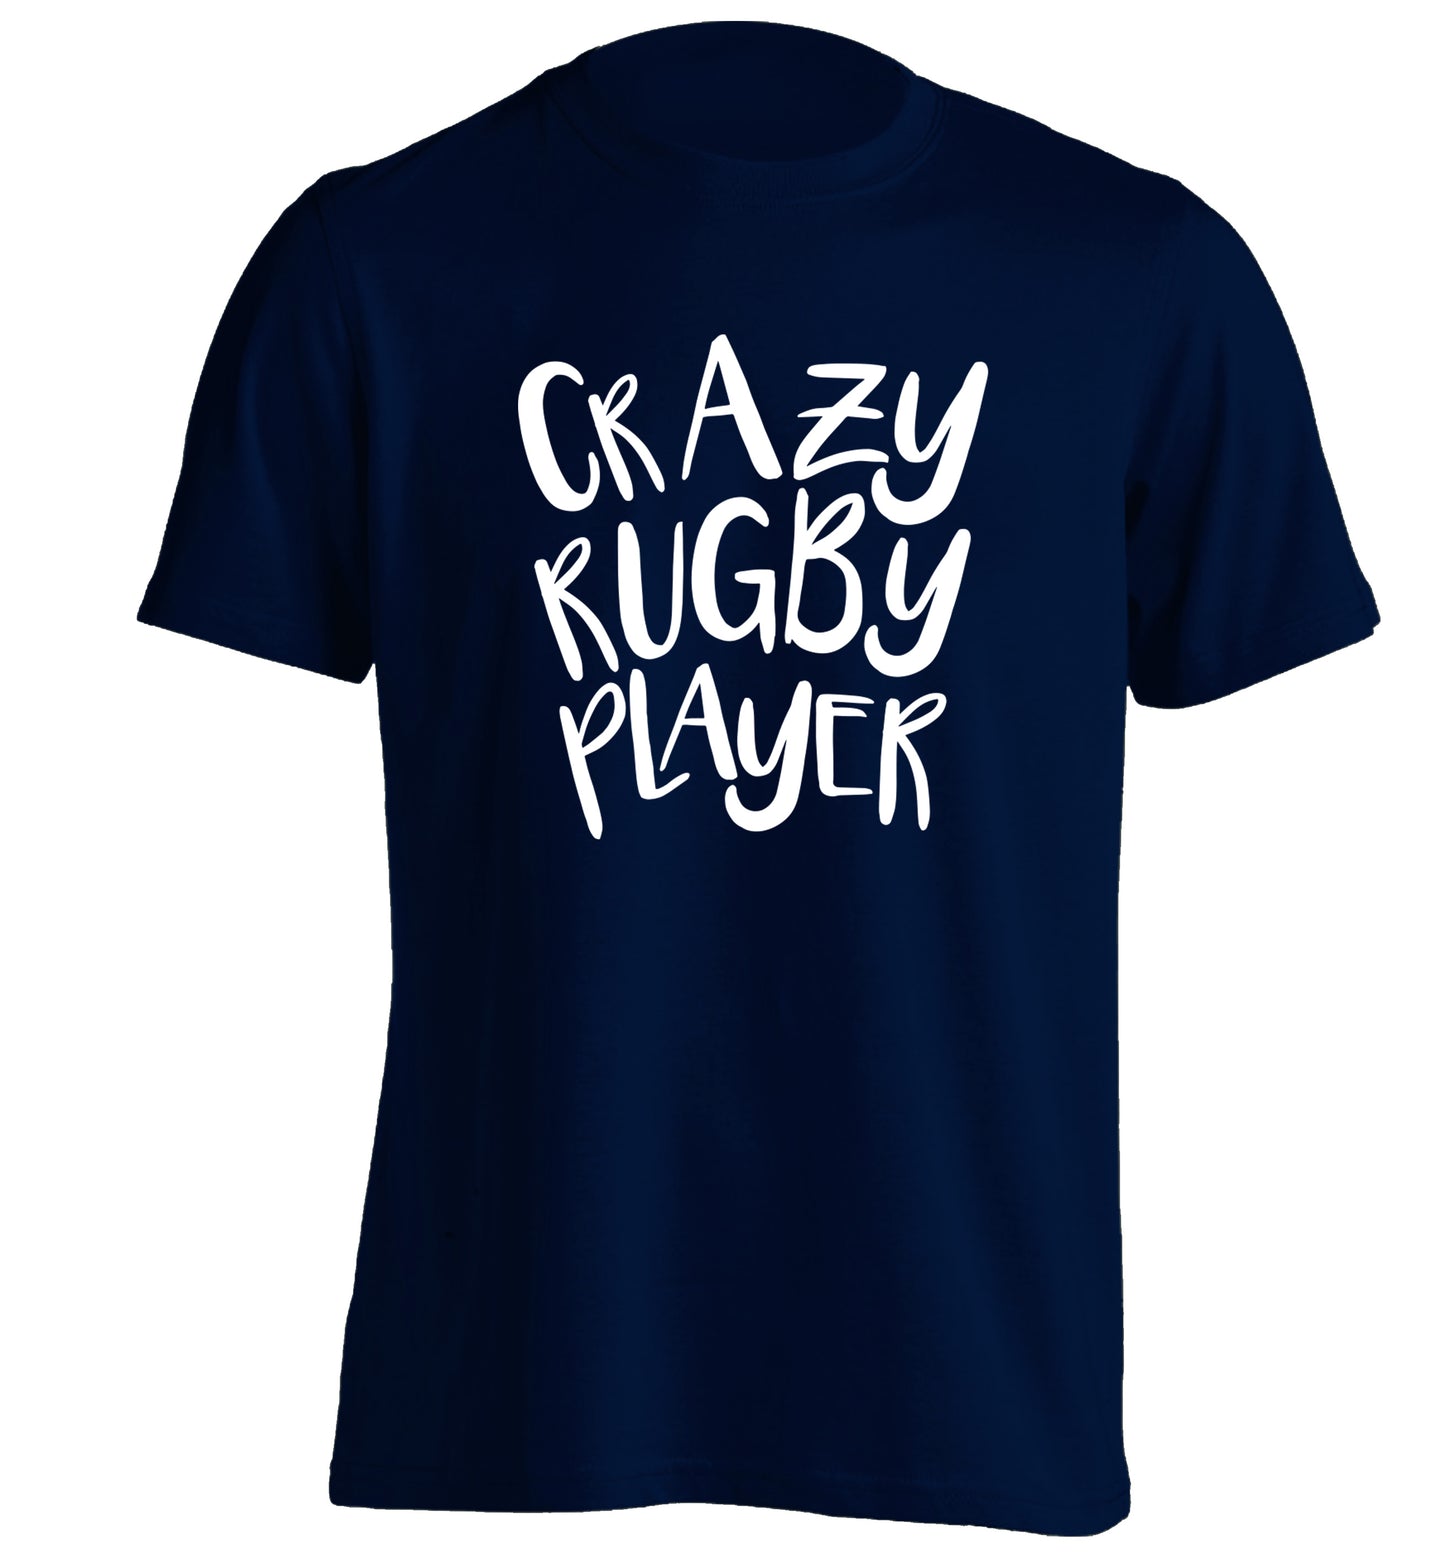 Crazy rugby player adults unisex navy Tshirt 2XL